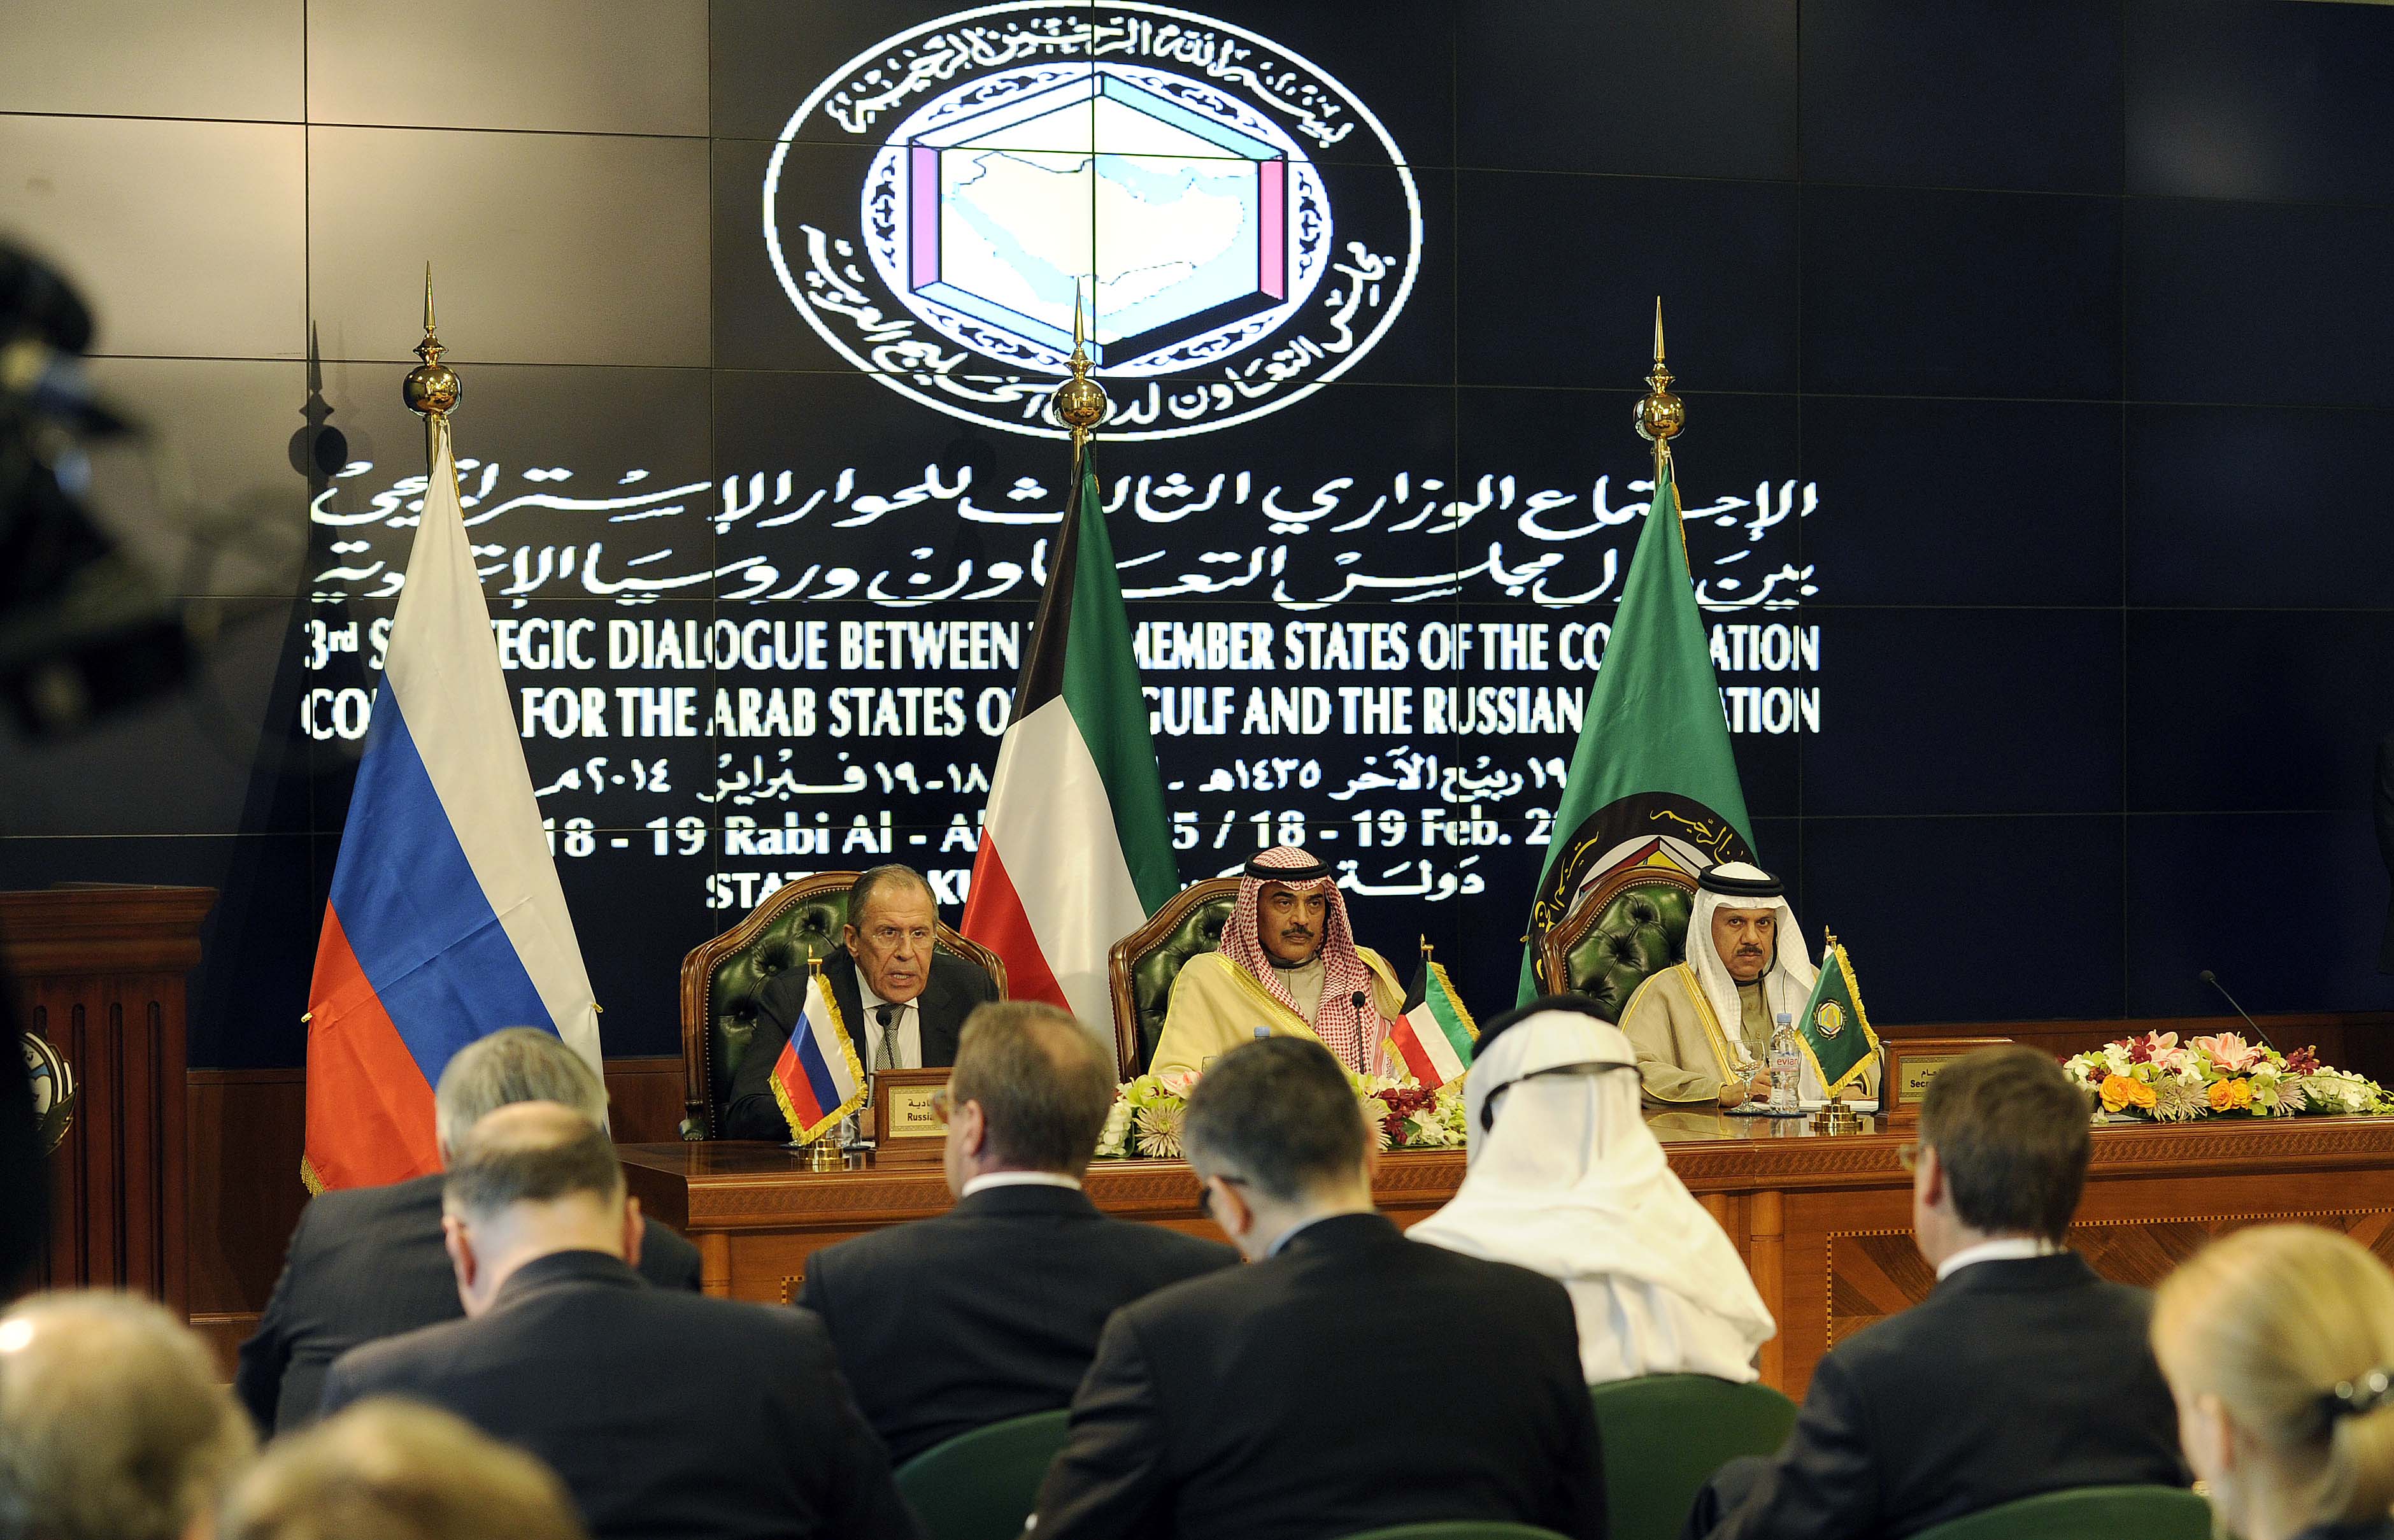 First Deputy Premier and Foreign Minister Sheikh Sabah Khaled Al-Hamad Al-Sabah, Russian Foreign Minister Sergei Lavrov and GCC Secretary General Abdul-Latif Al-Zayani during the press conference